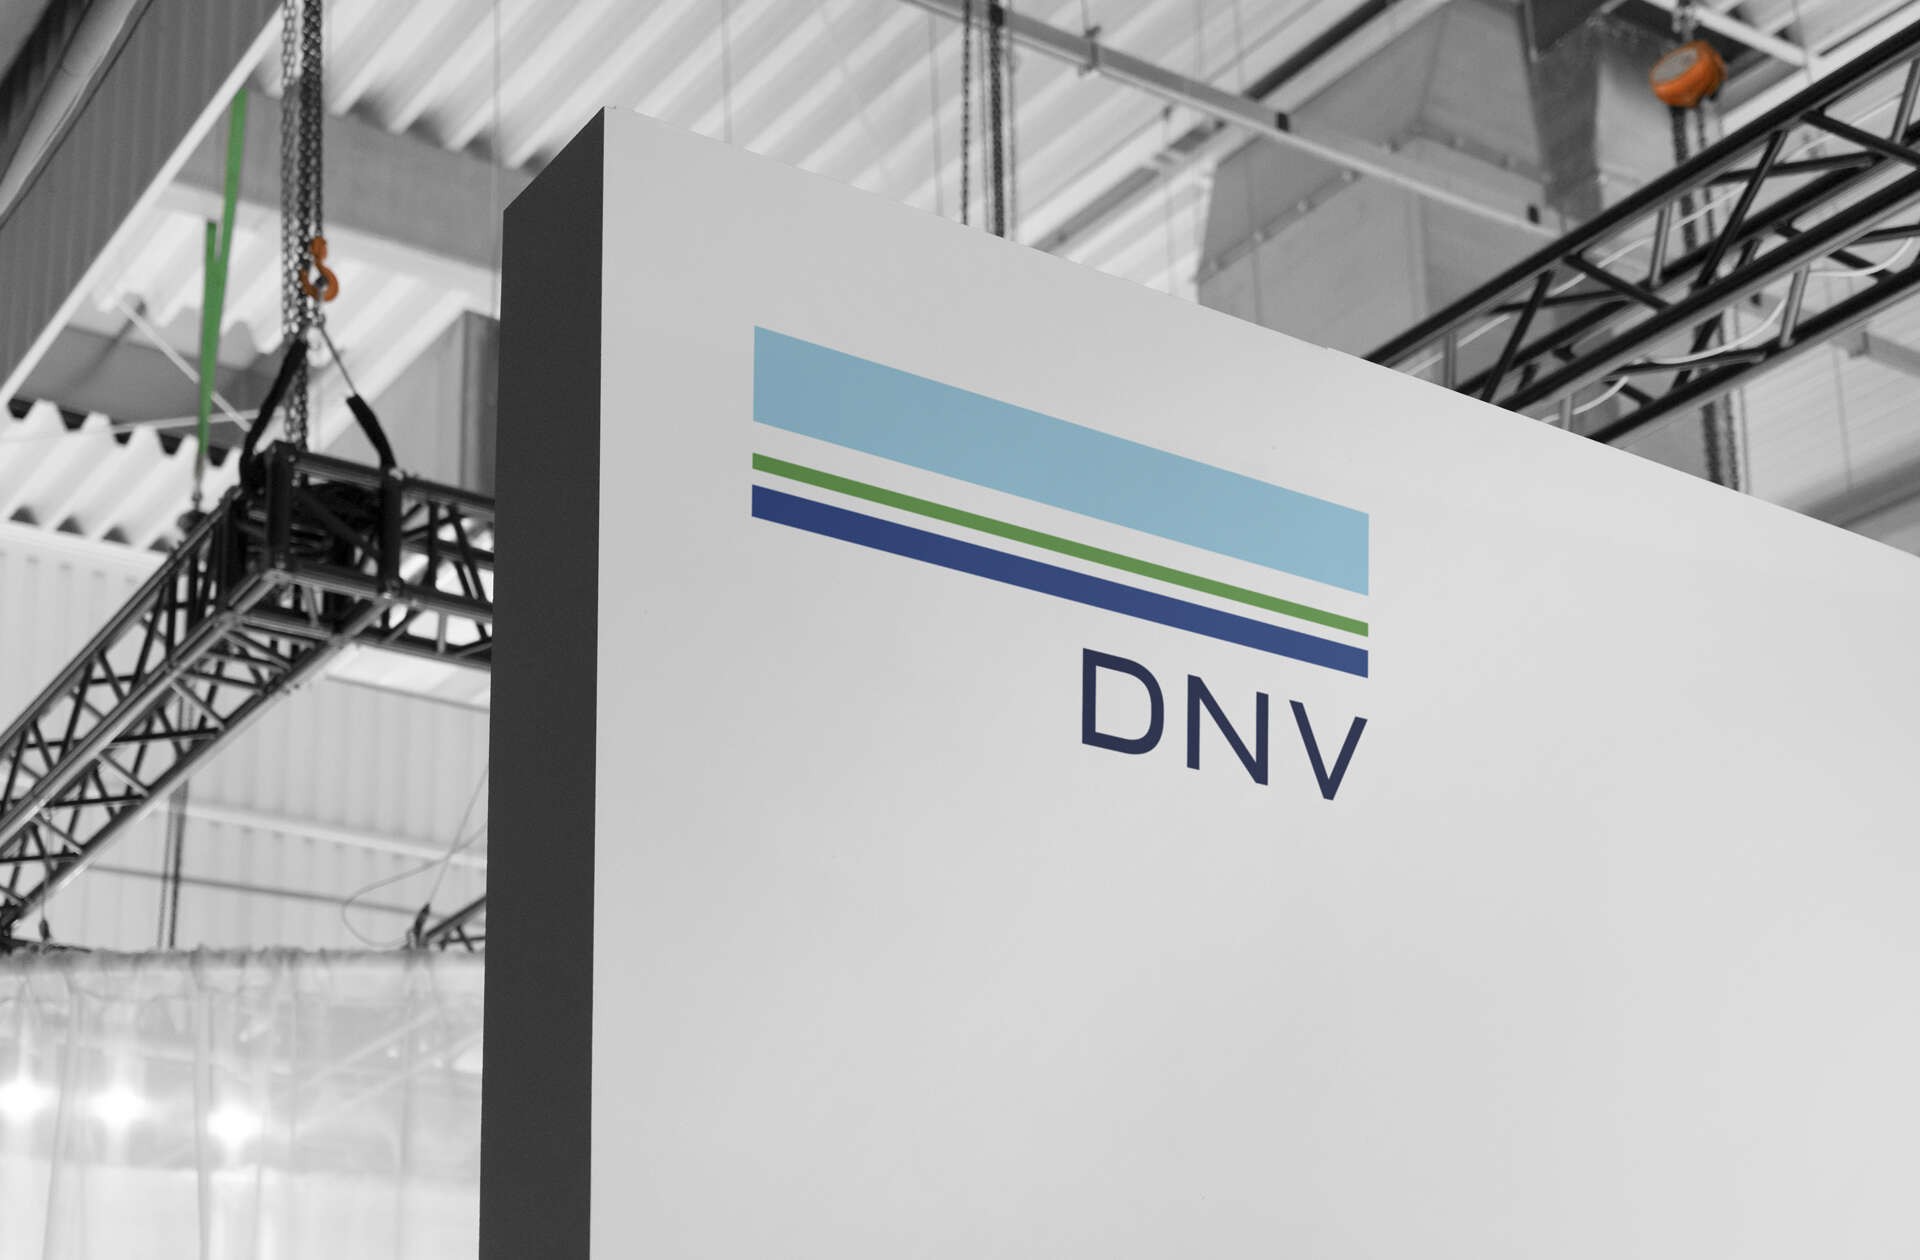 DNV joins new European Fund launched by global investment firm Energy Impact Partners to accelerate push towards net zero